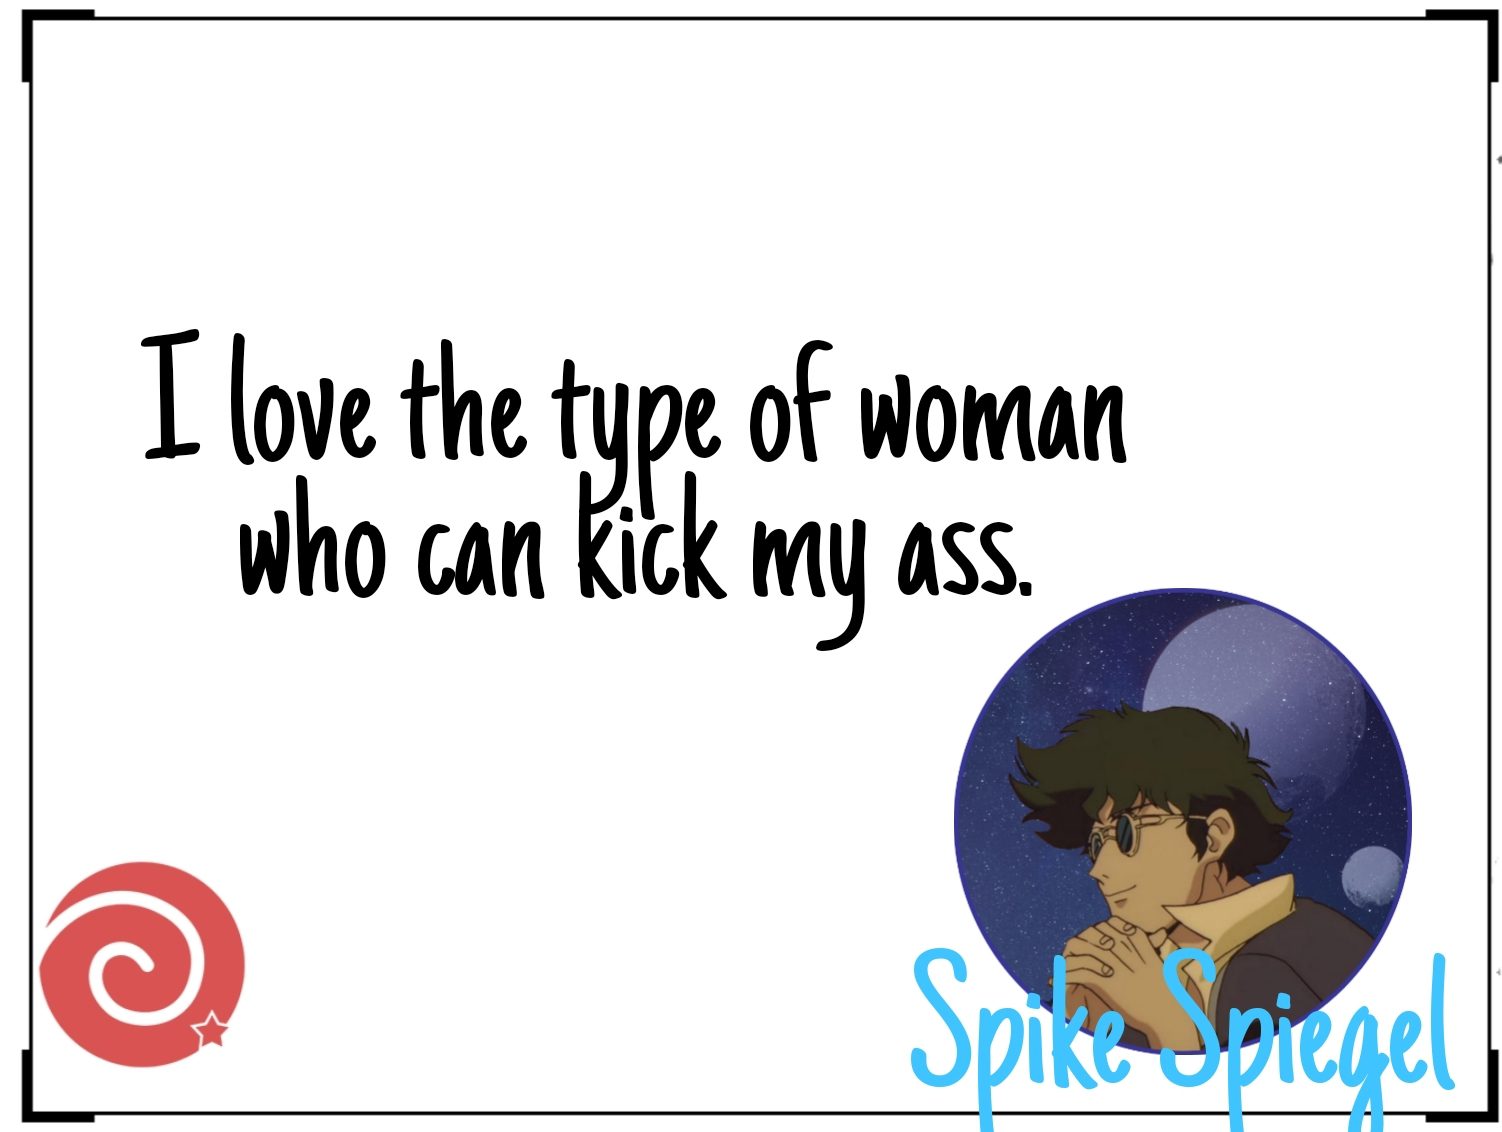 Quote from Cowboy Bebop